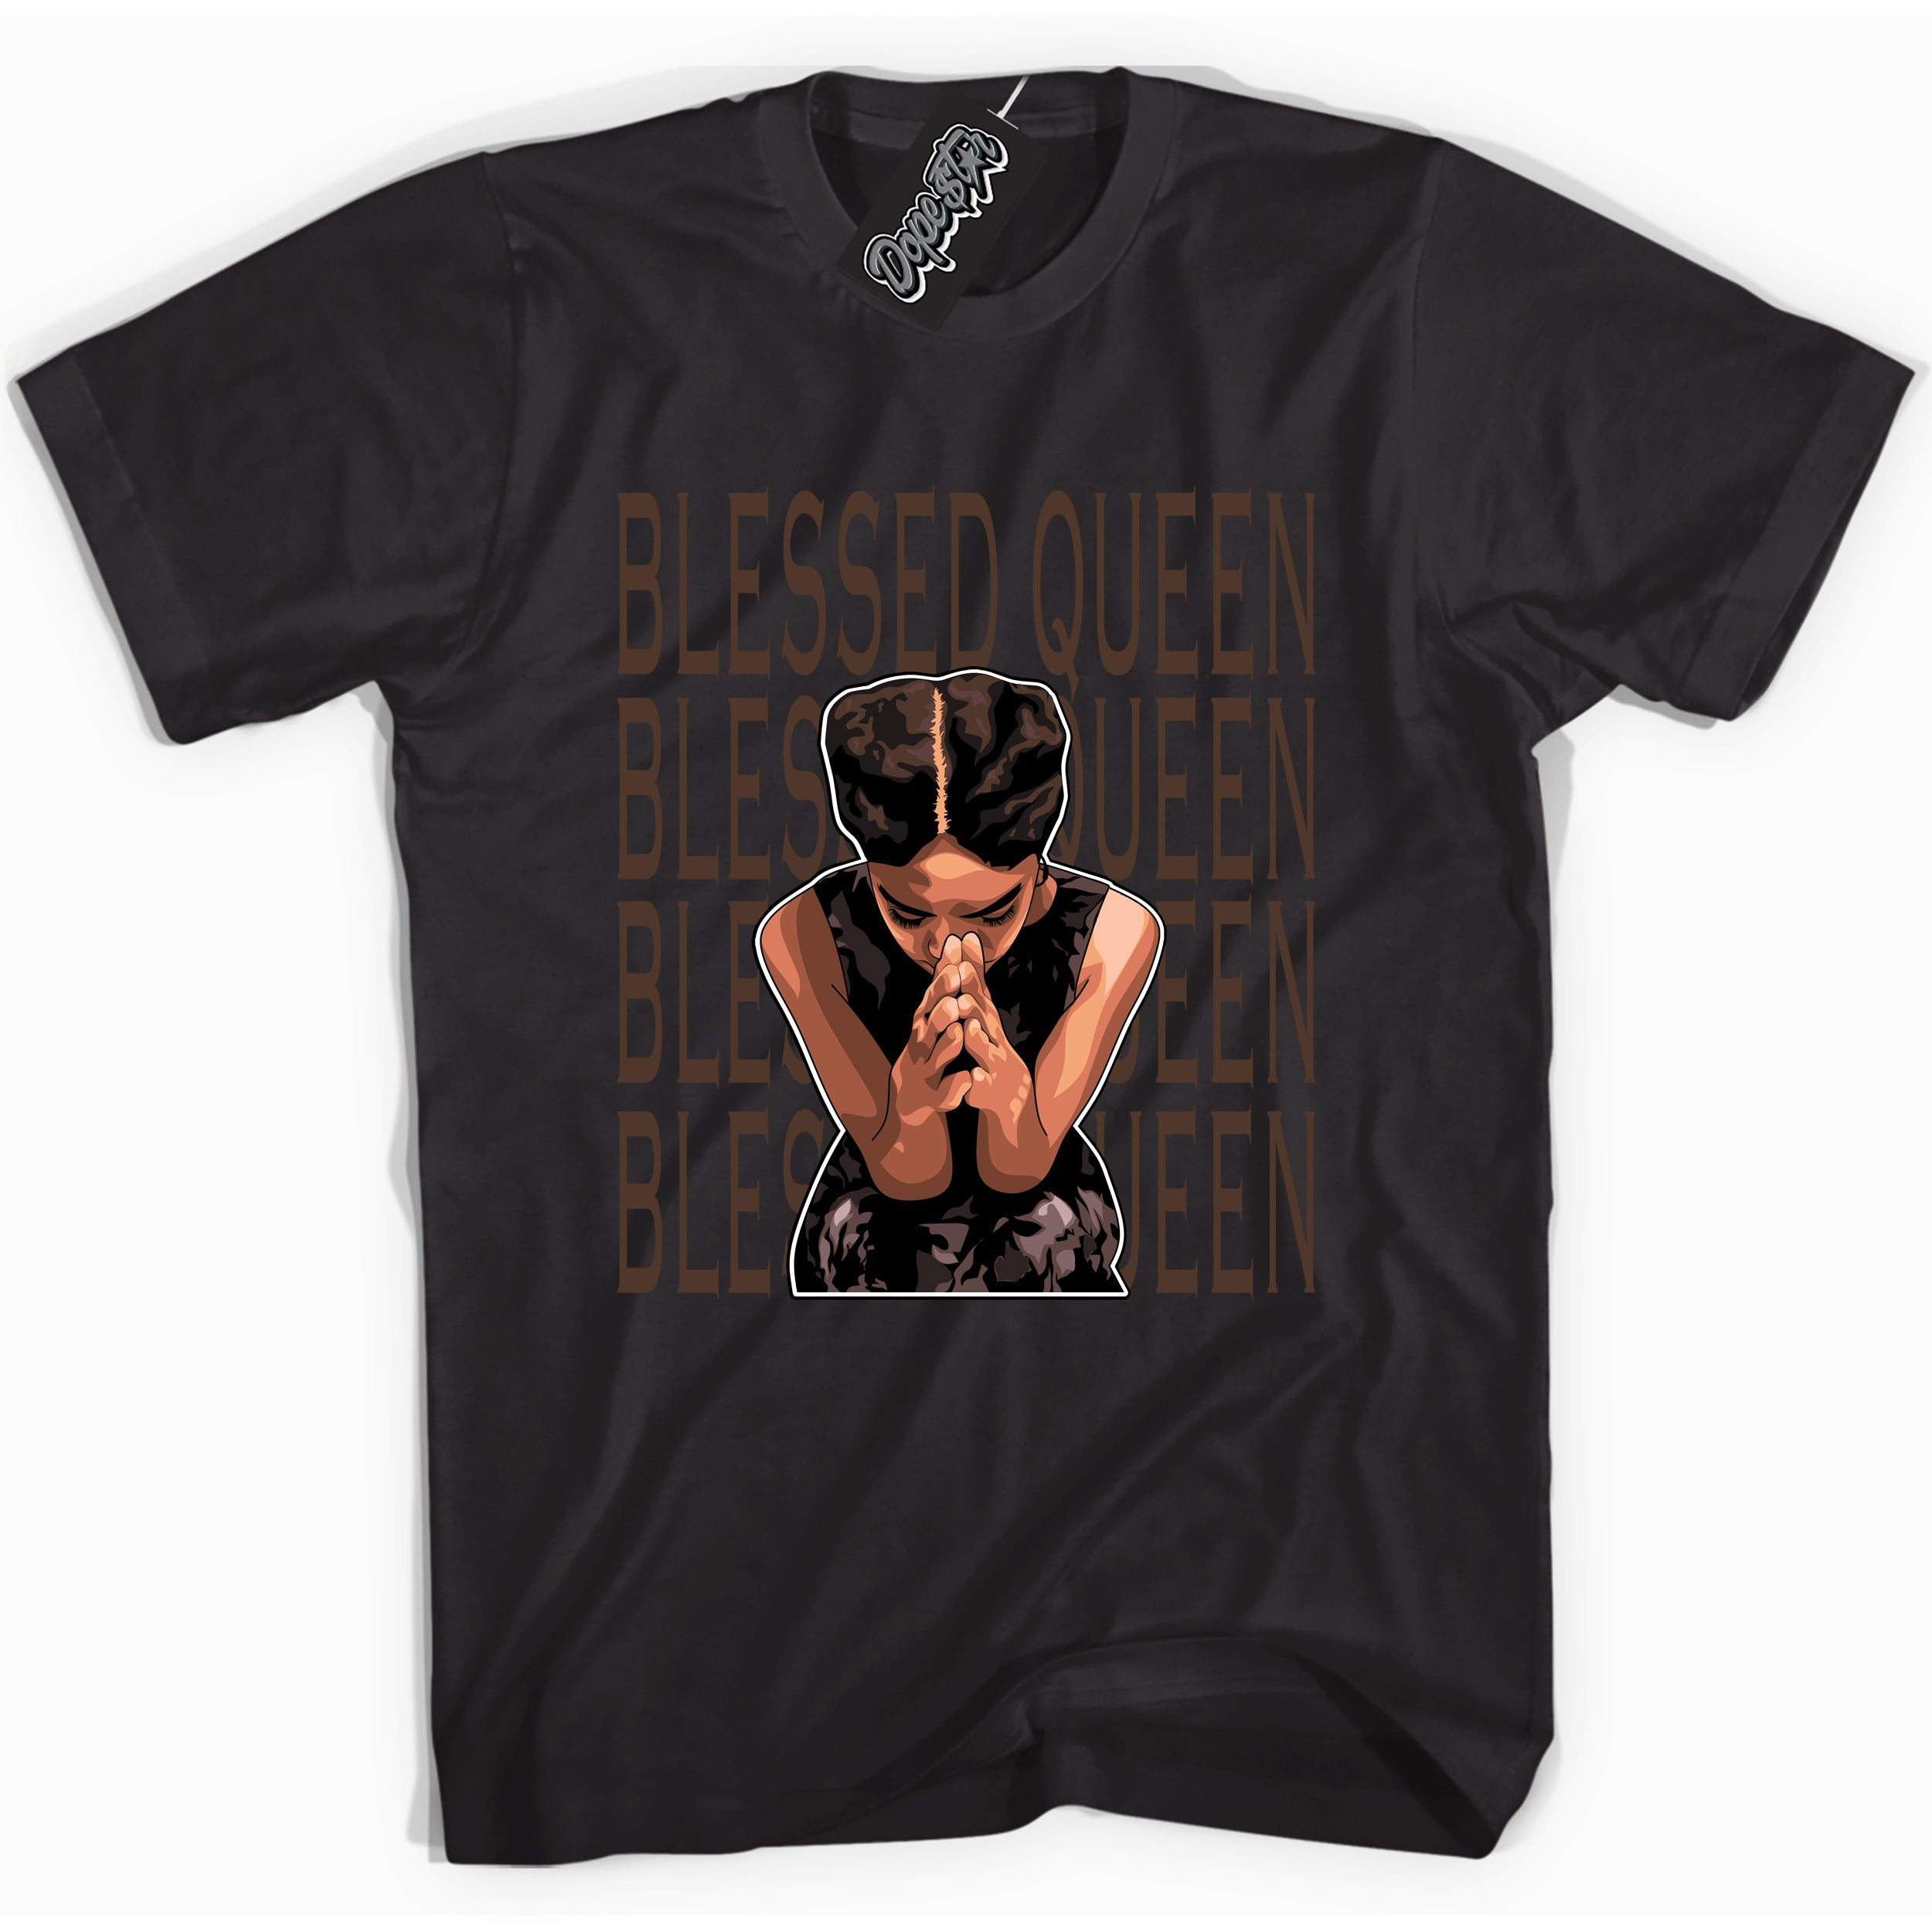 Cool Black graphic tee with “ Blessed Queen ” design, that perfectly matches Palomino 1s sneakers 